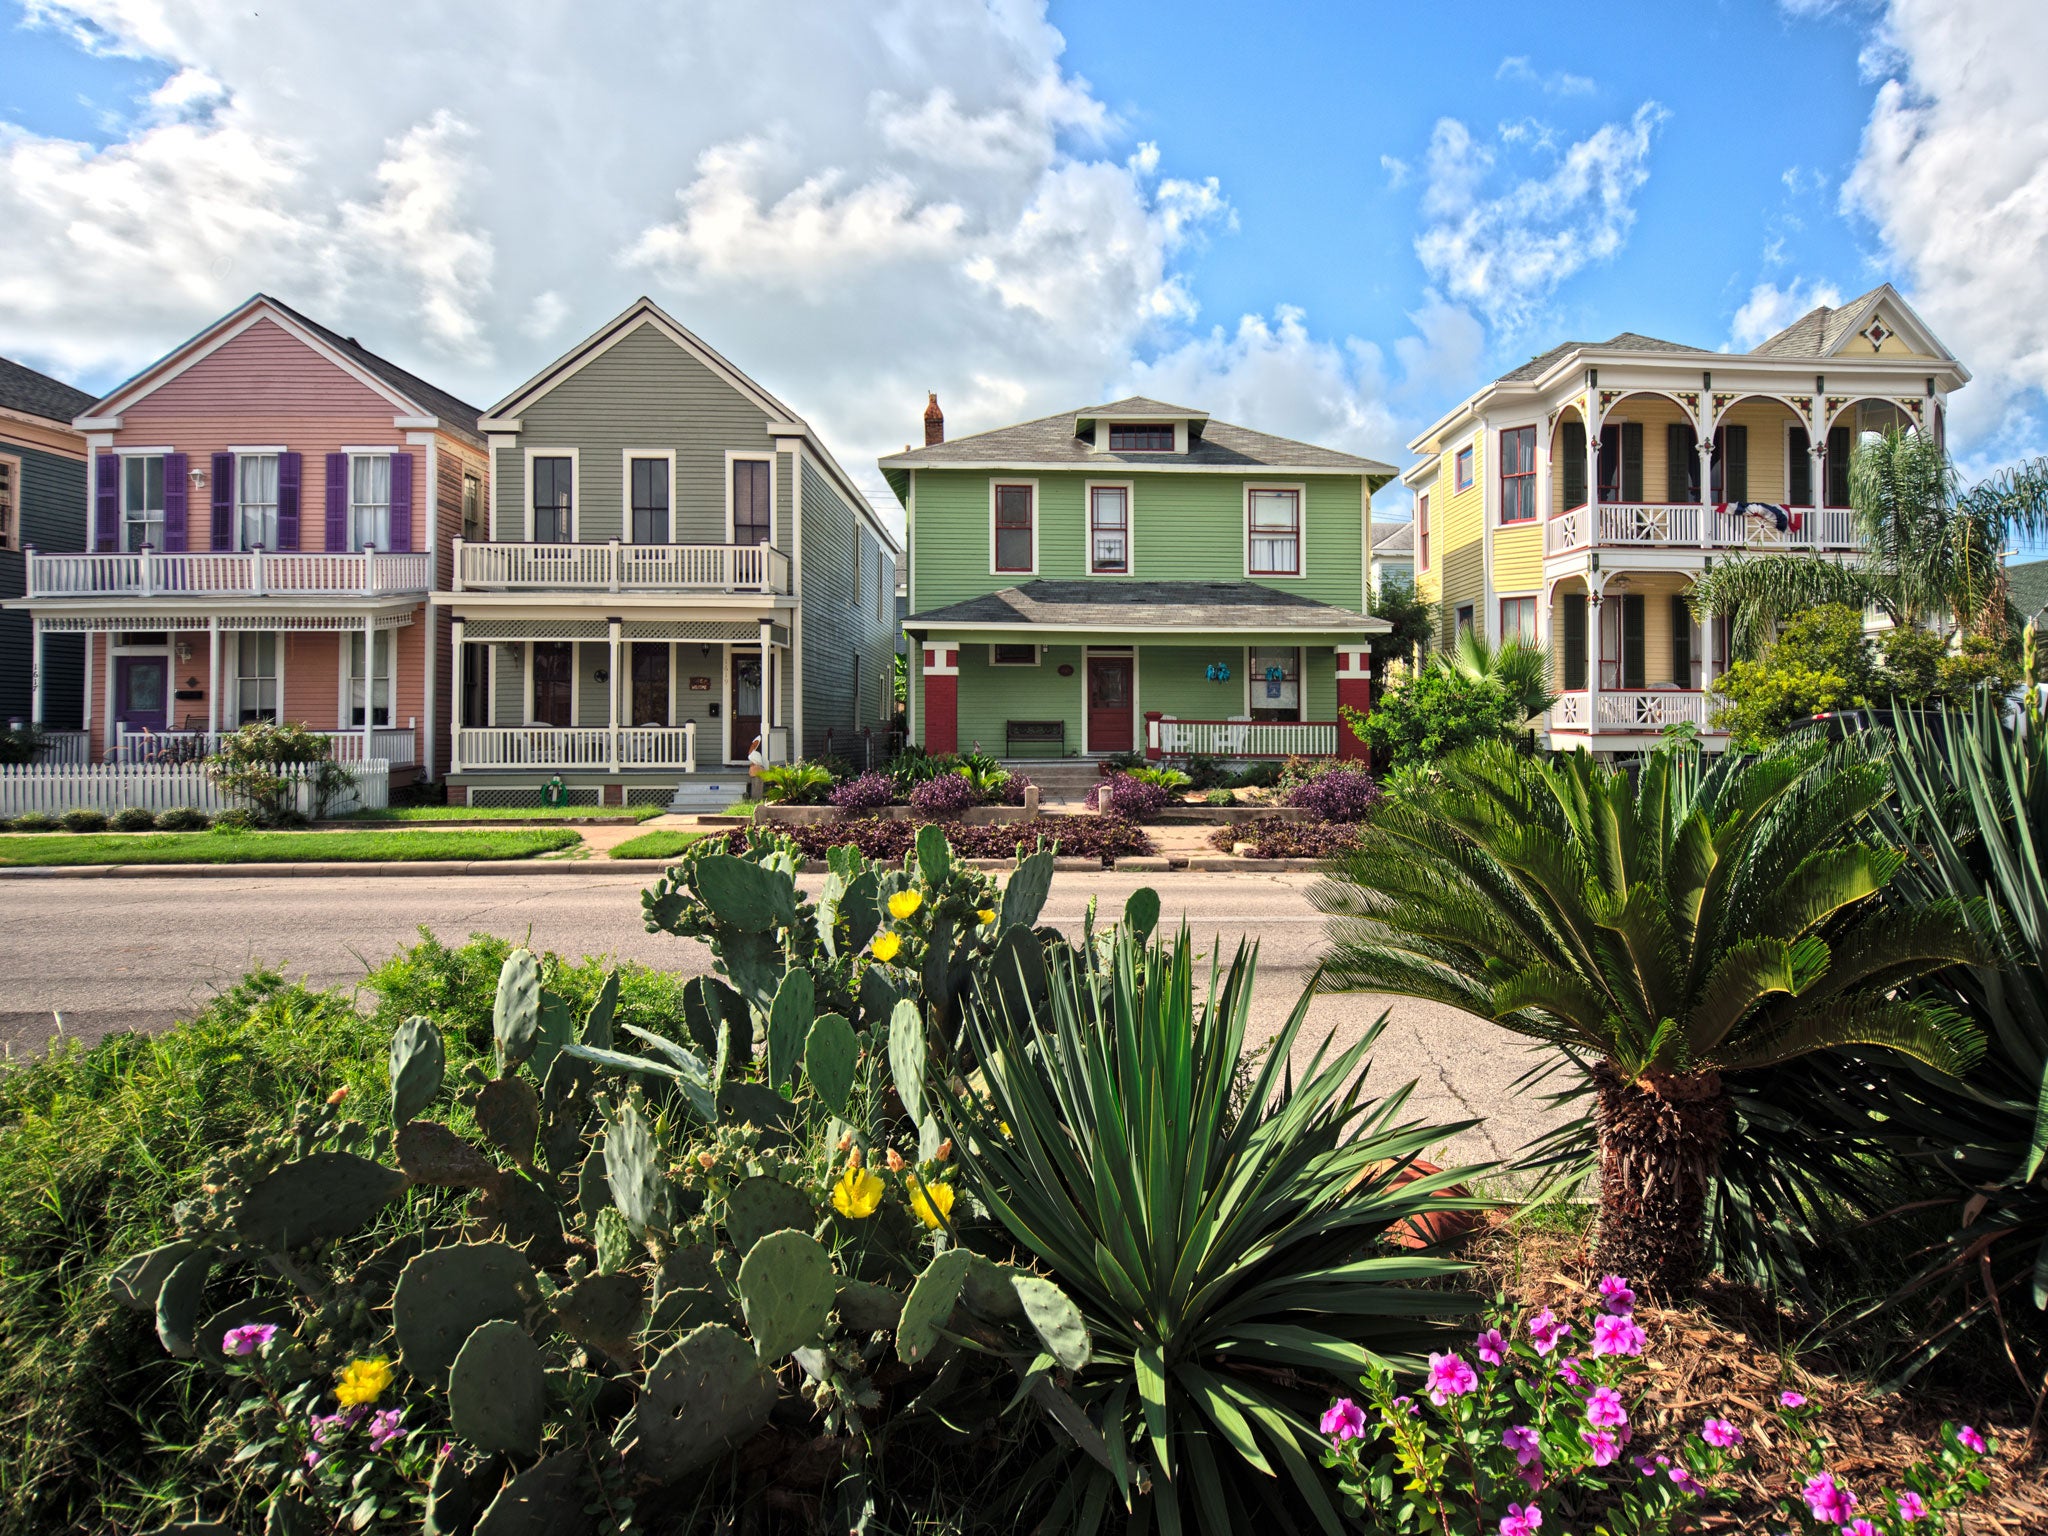 Bright and beautiful: Prettily painted homes in the East End Historic District of Galveston